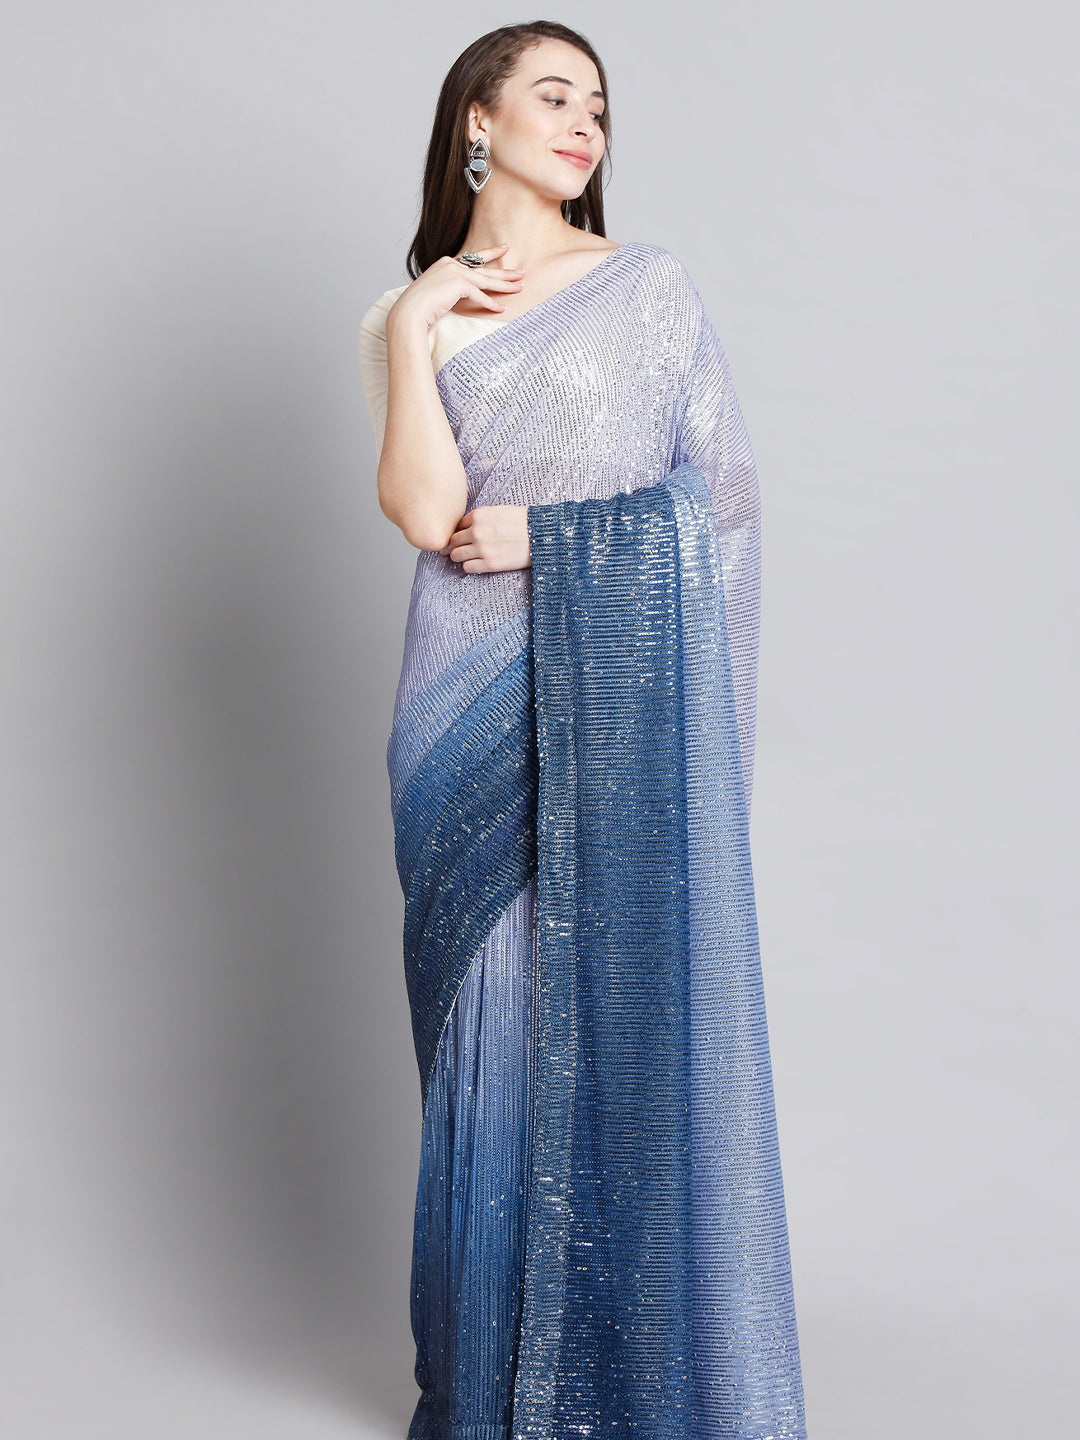 Blue Georgette Sequins Embroidered Skirt Saree Set Design by Archana  Kochhar at Pernia's Pop Up Shop 2023